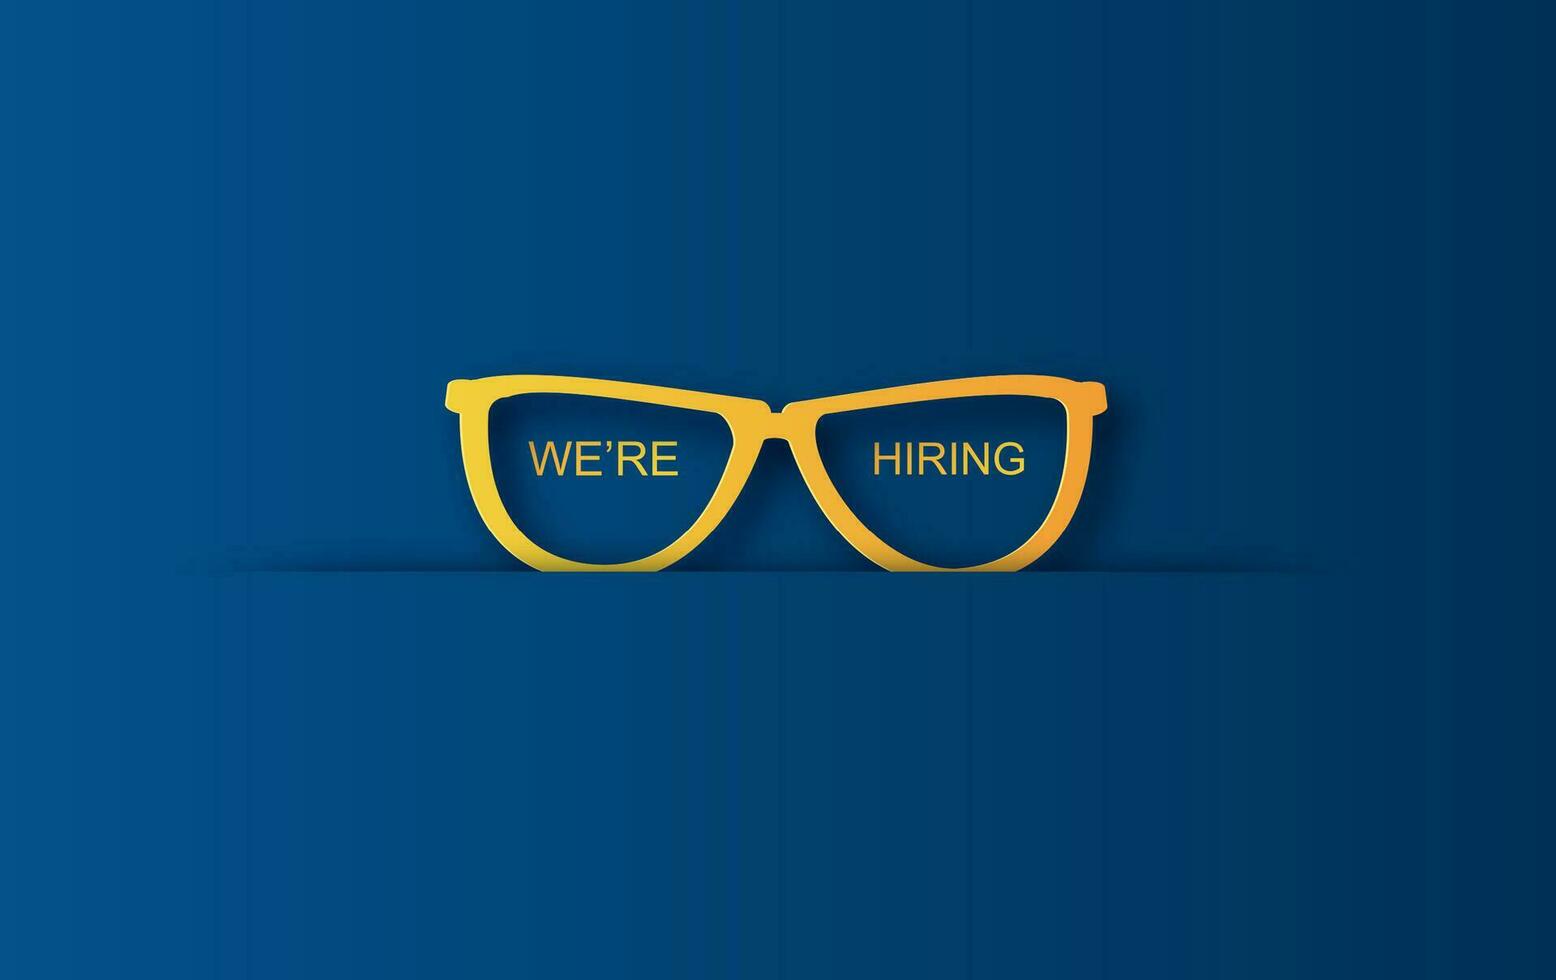 Hiring and recruitment poster concept. Design Paper art and craft with minimalist blue color tone style glasses, job advertisement, Recruitment poster or banner vector concept in mimimalist Symbol.